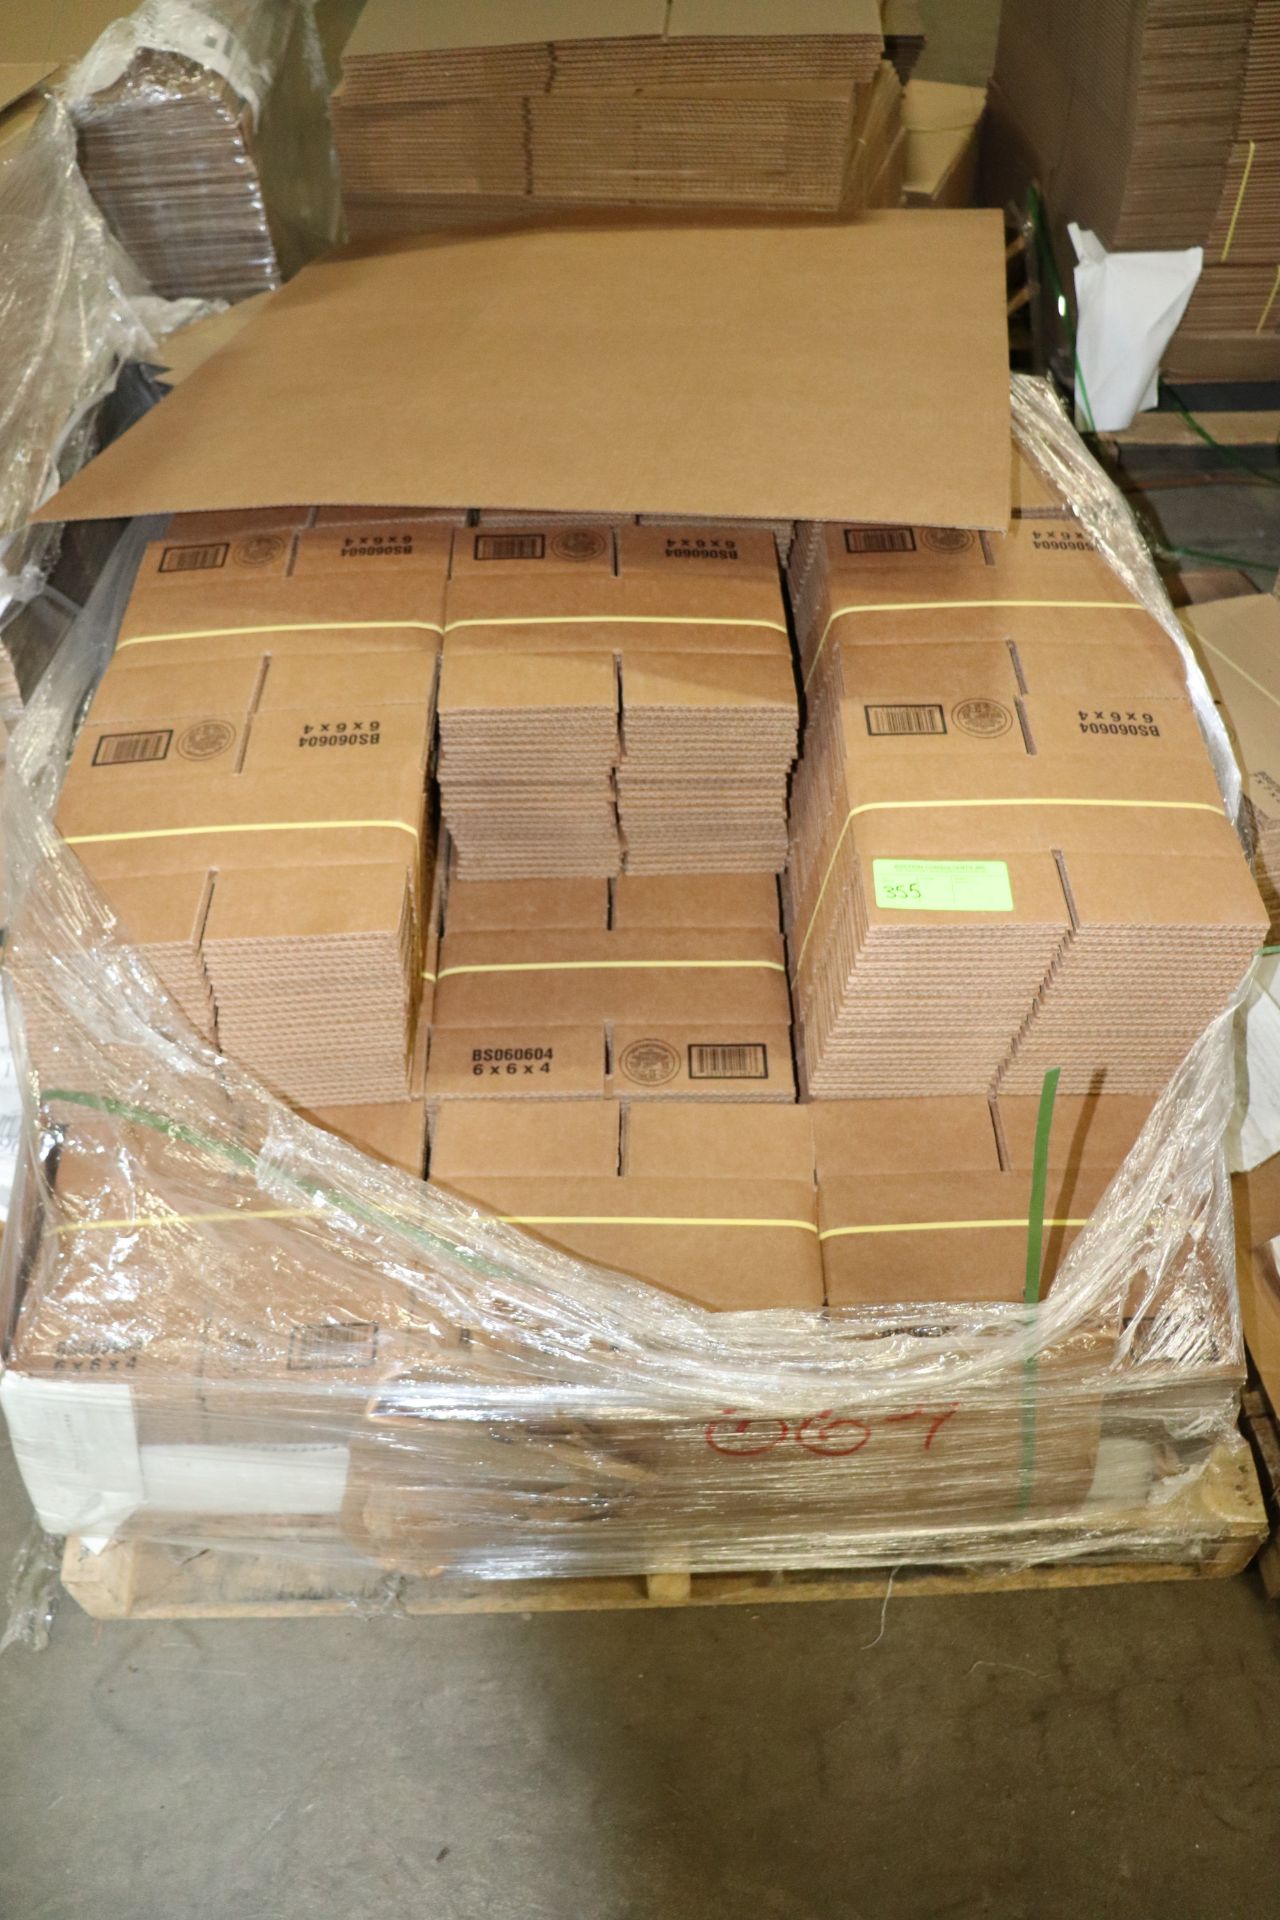 Pallet of boxes, 6" x 6" x 4"